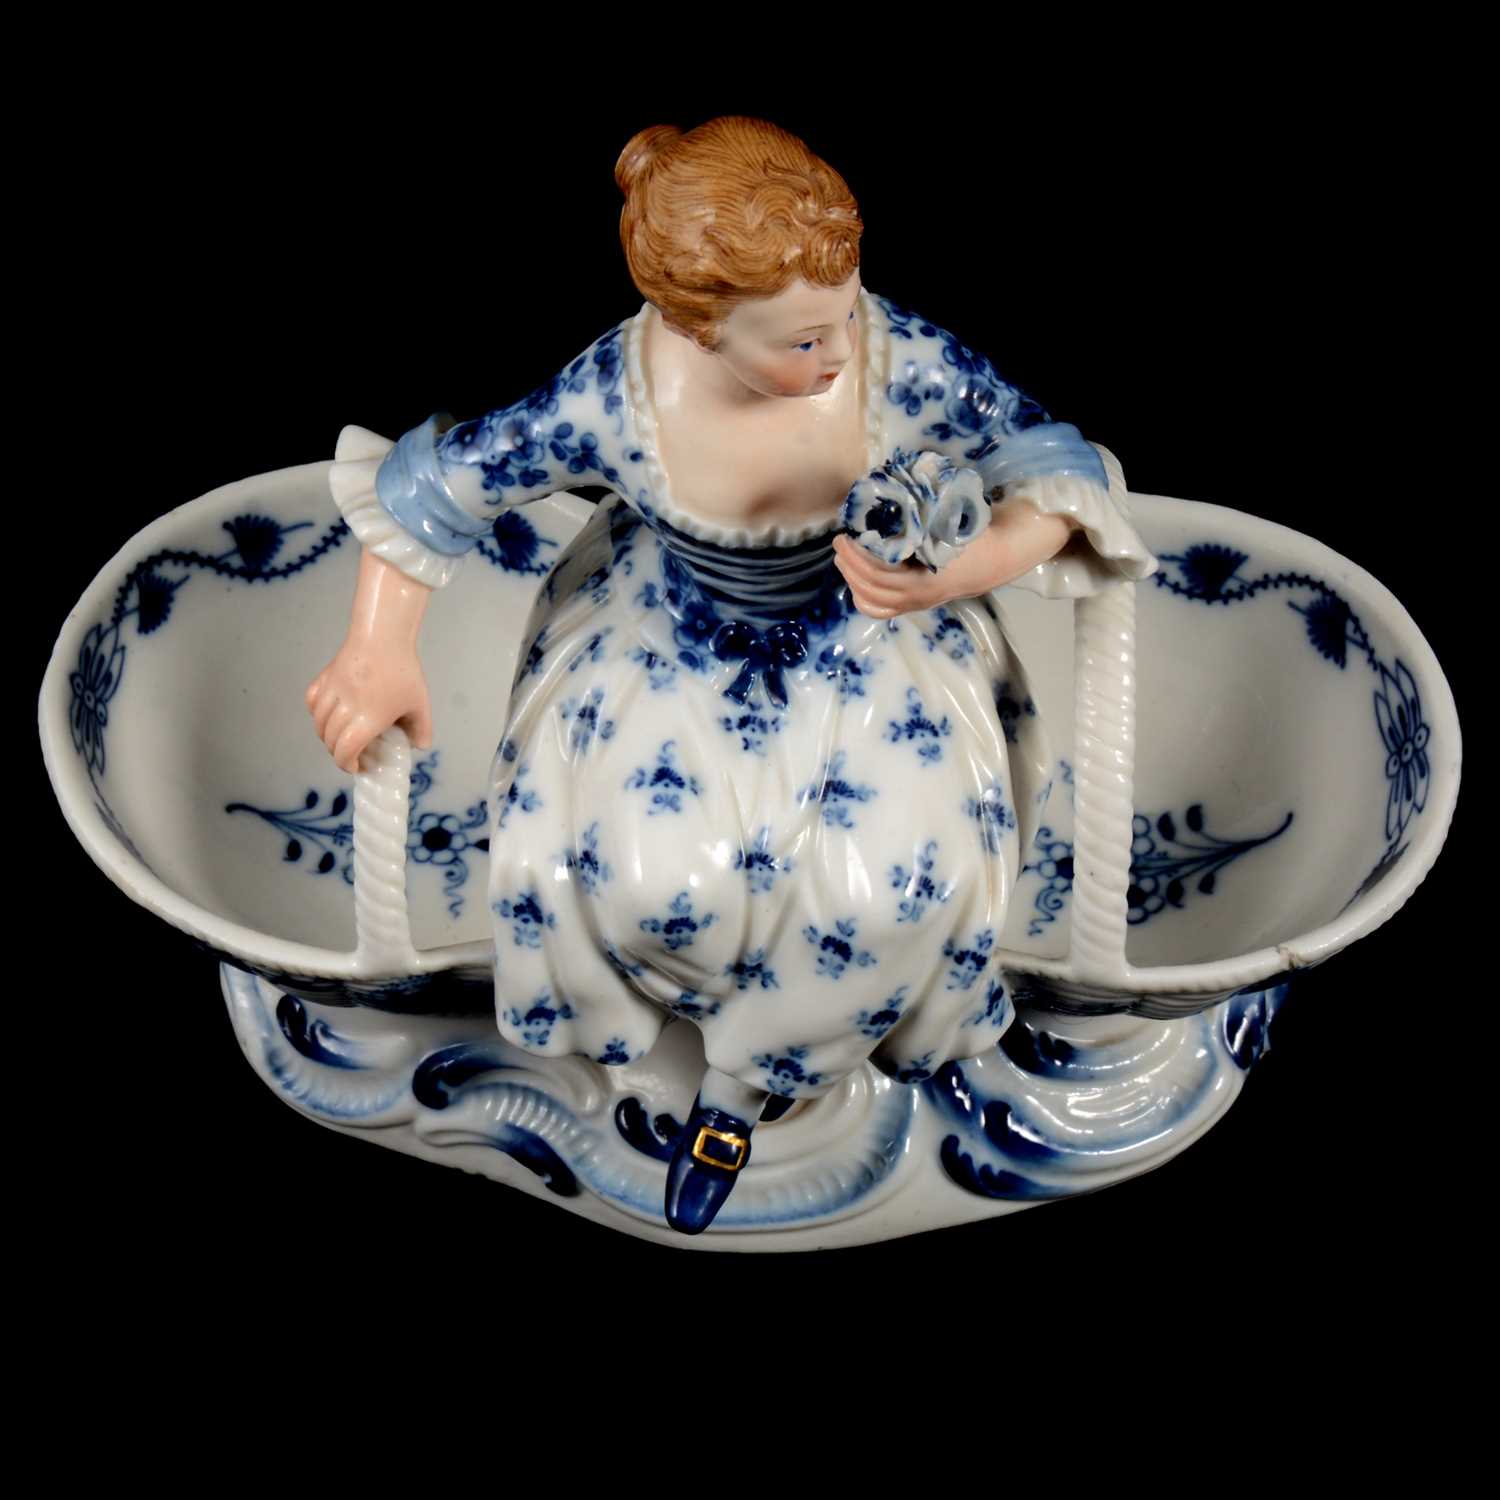 Near pair of Meissen porcelain figural table salts, late 19th / early 20th century - Image 8 of 21